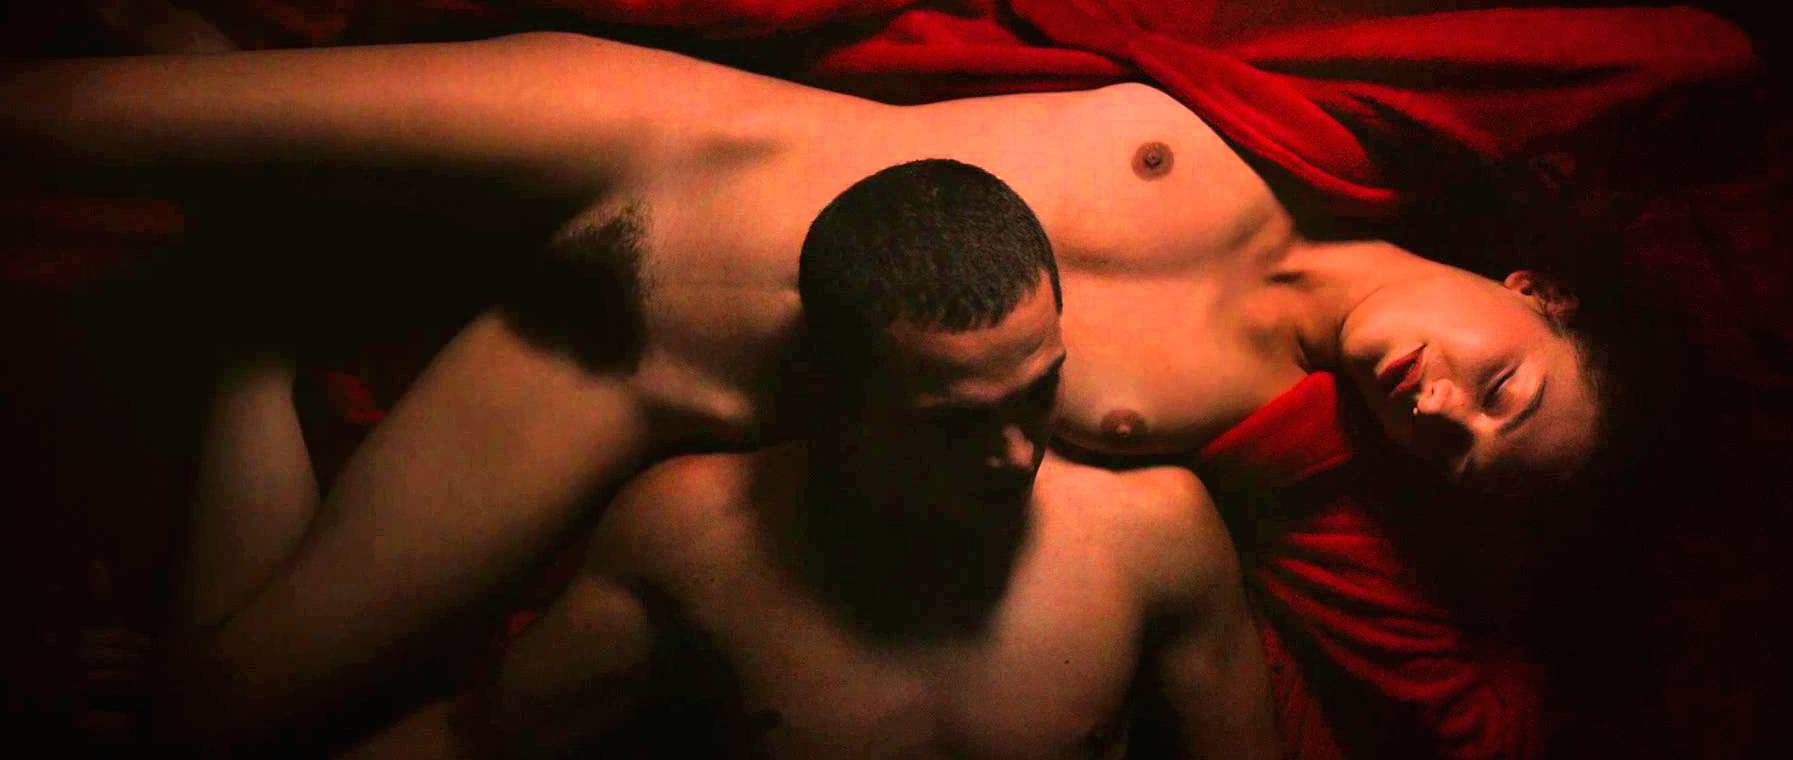 gaspar noe on love a pornographic drama with erotic real sex